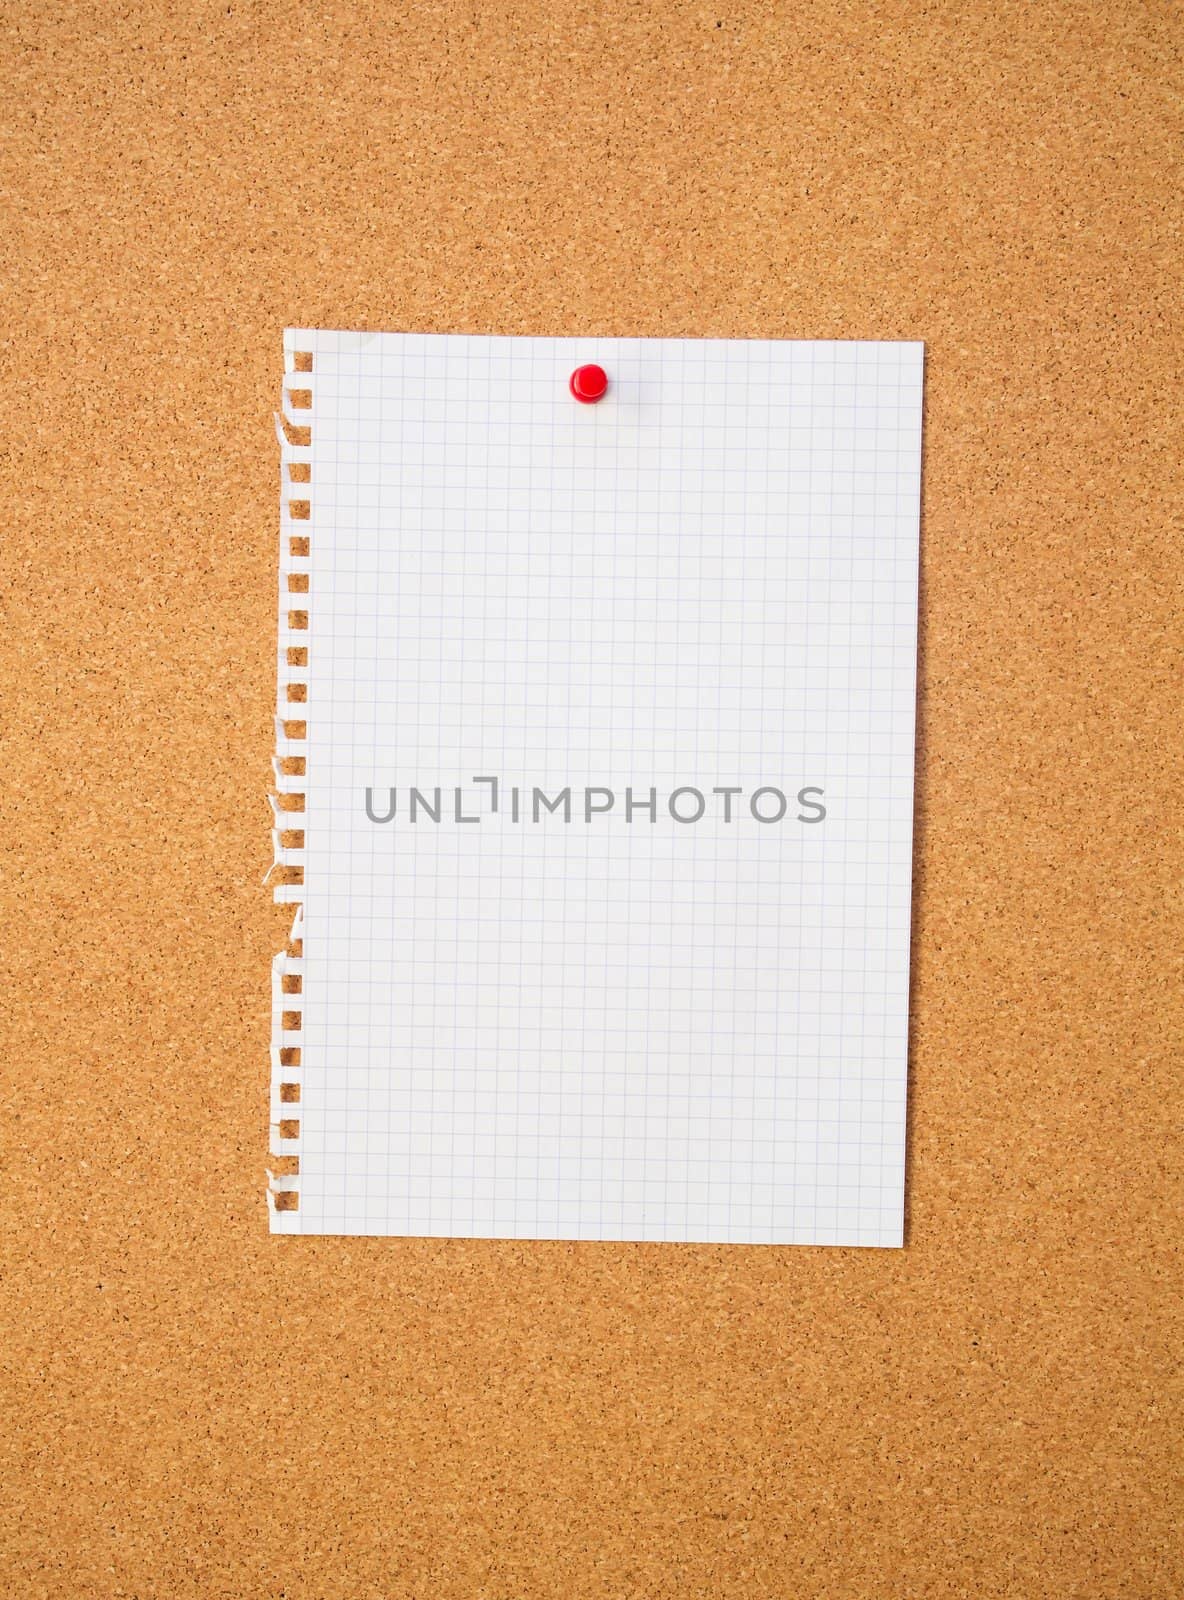 White sheet on pin board. Cork background  by simpson33